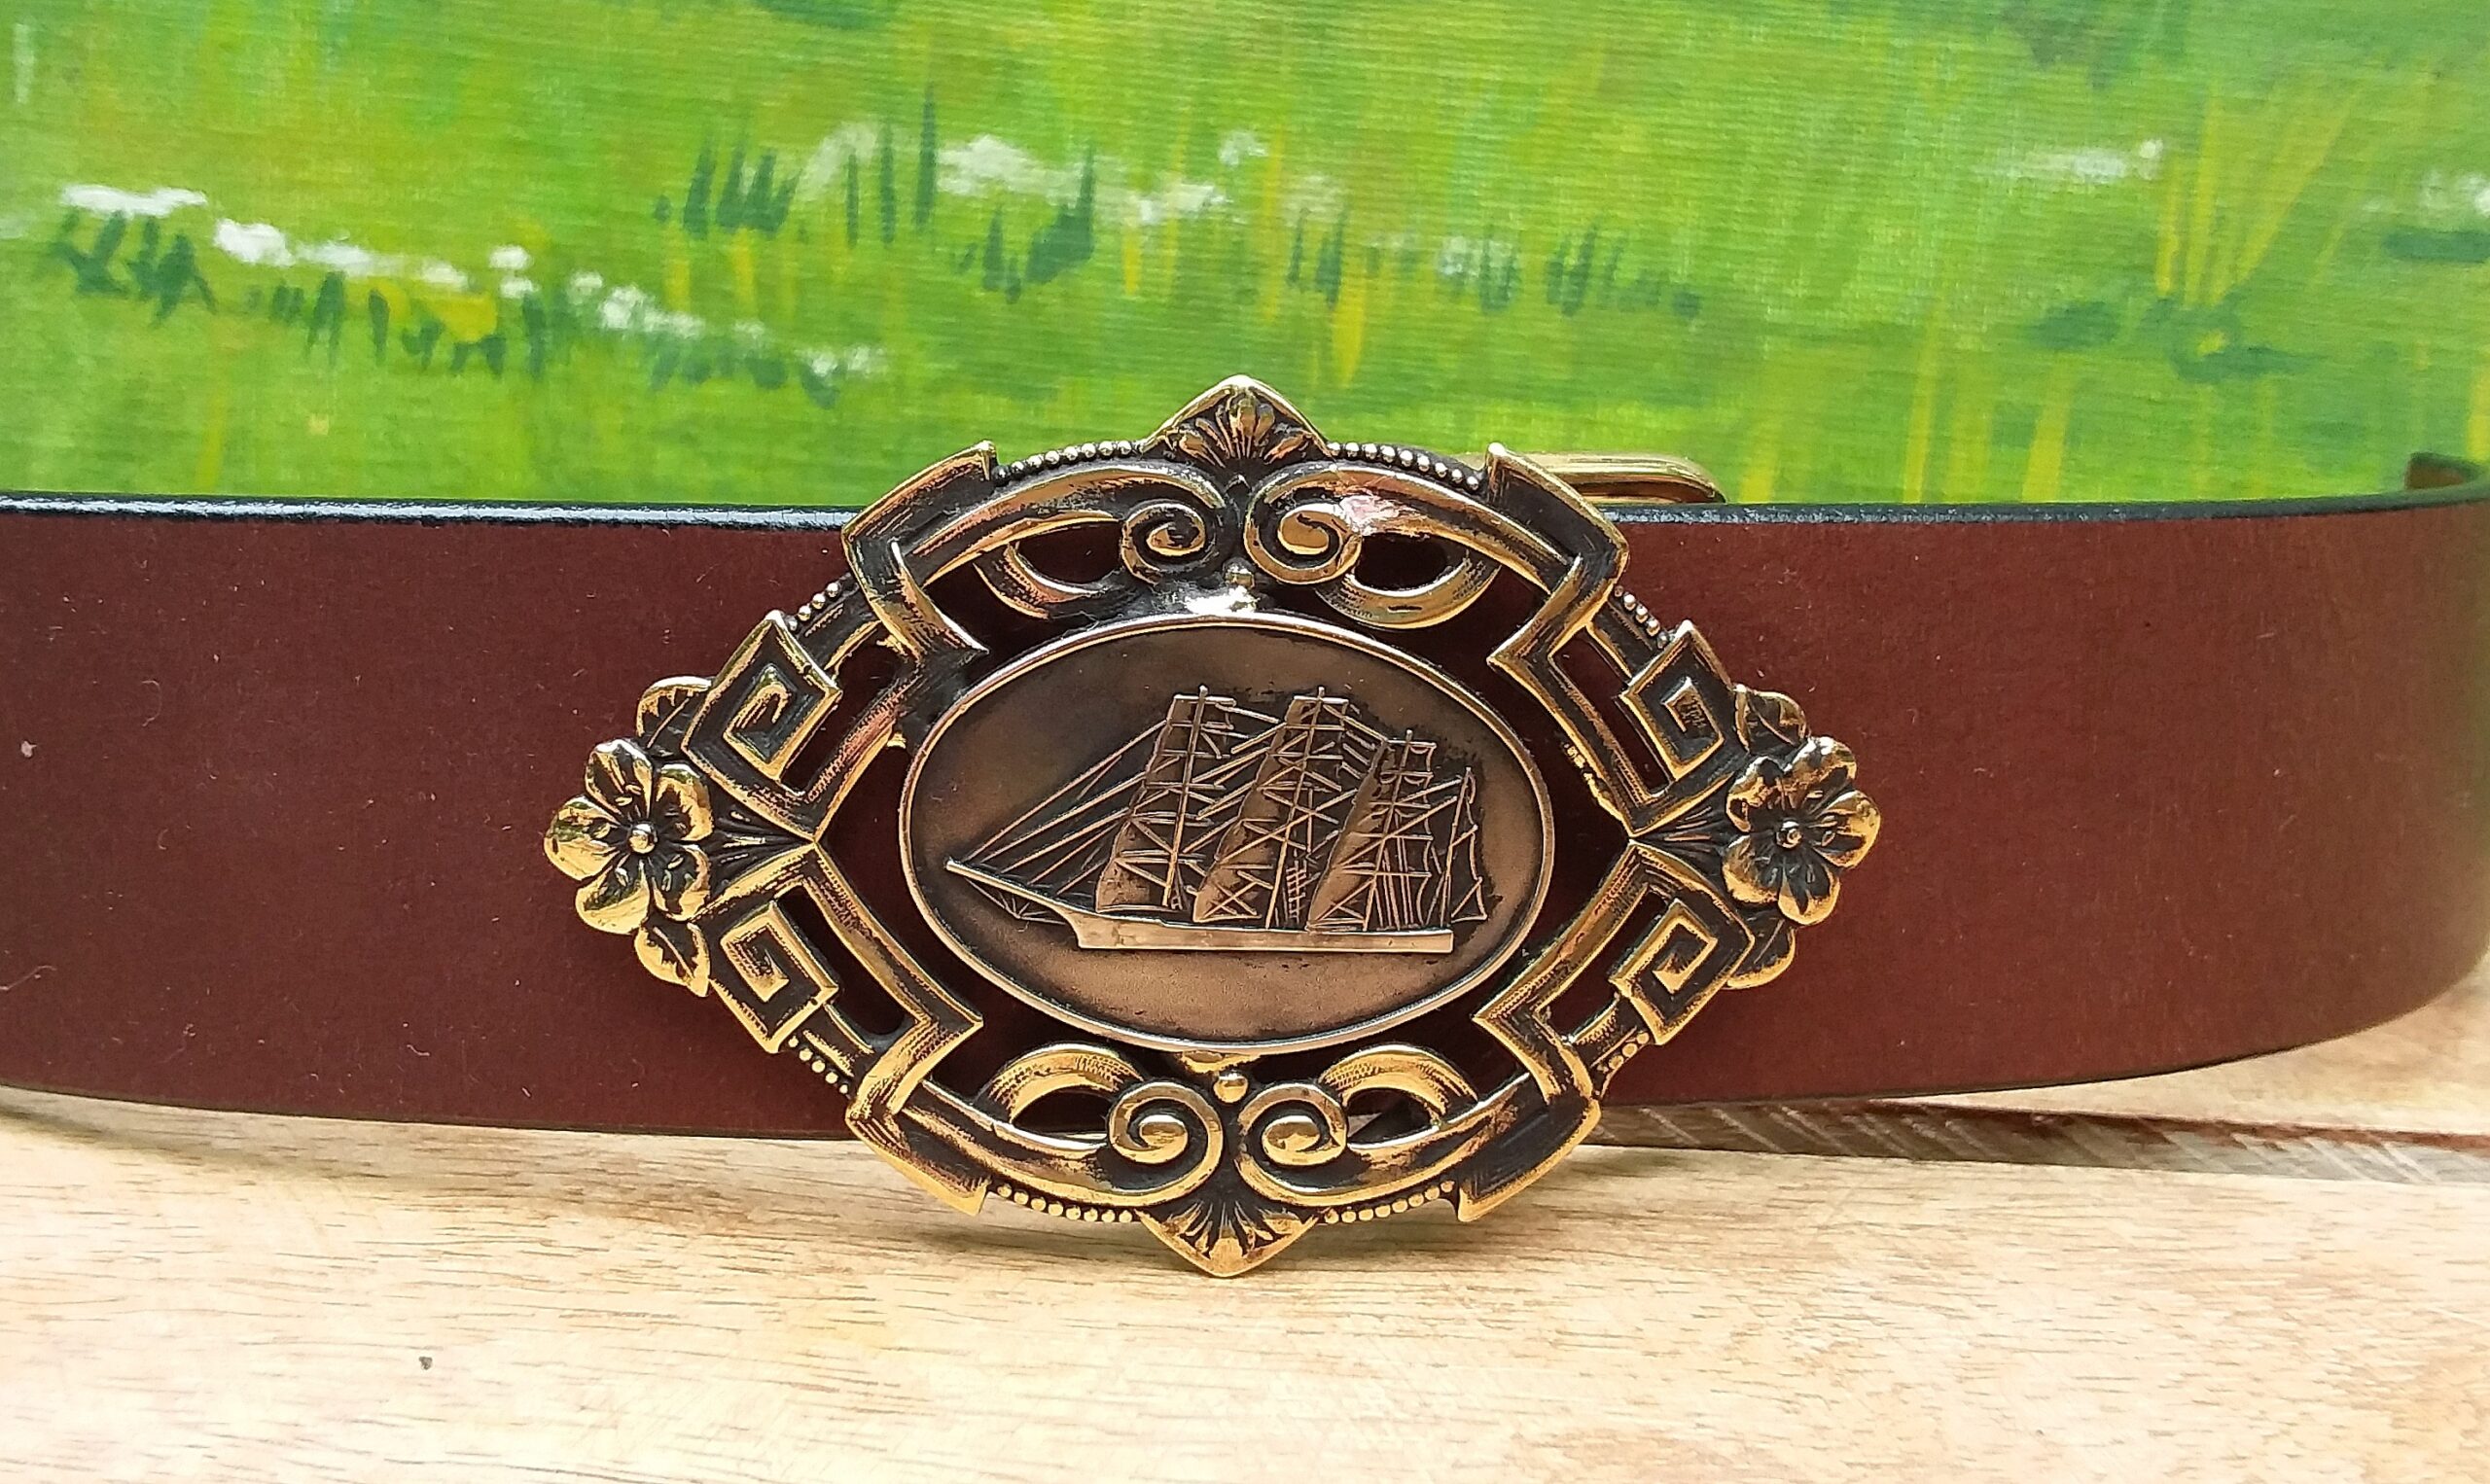 Vintage Buckle, Brass Belt Buckle, Clipper Ship, Solid Brass, Made in USA,  by BTS Company, 1981, Collectible Buckle, Nautical Collectible 